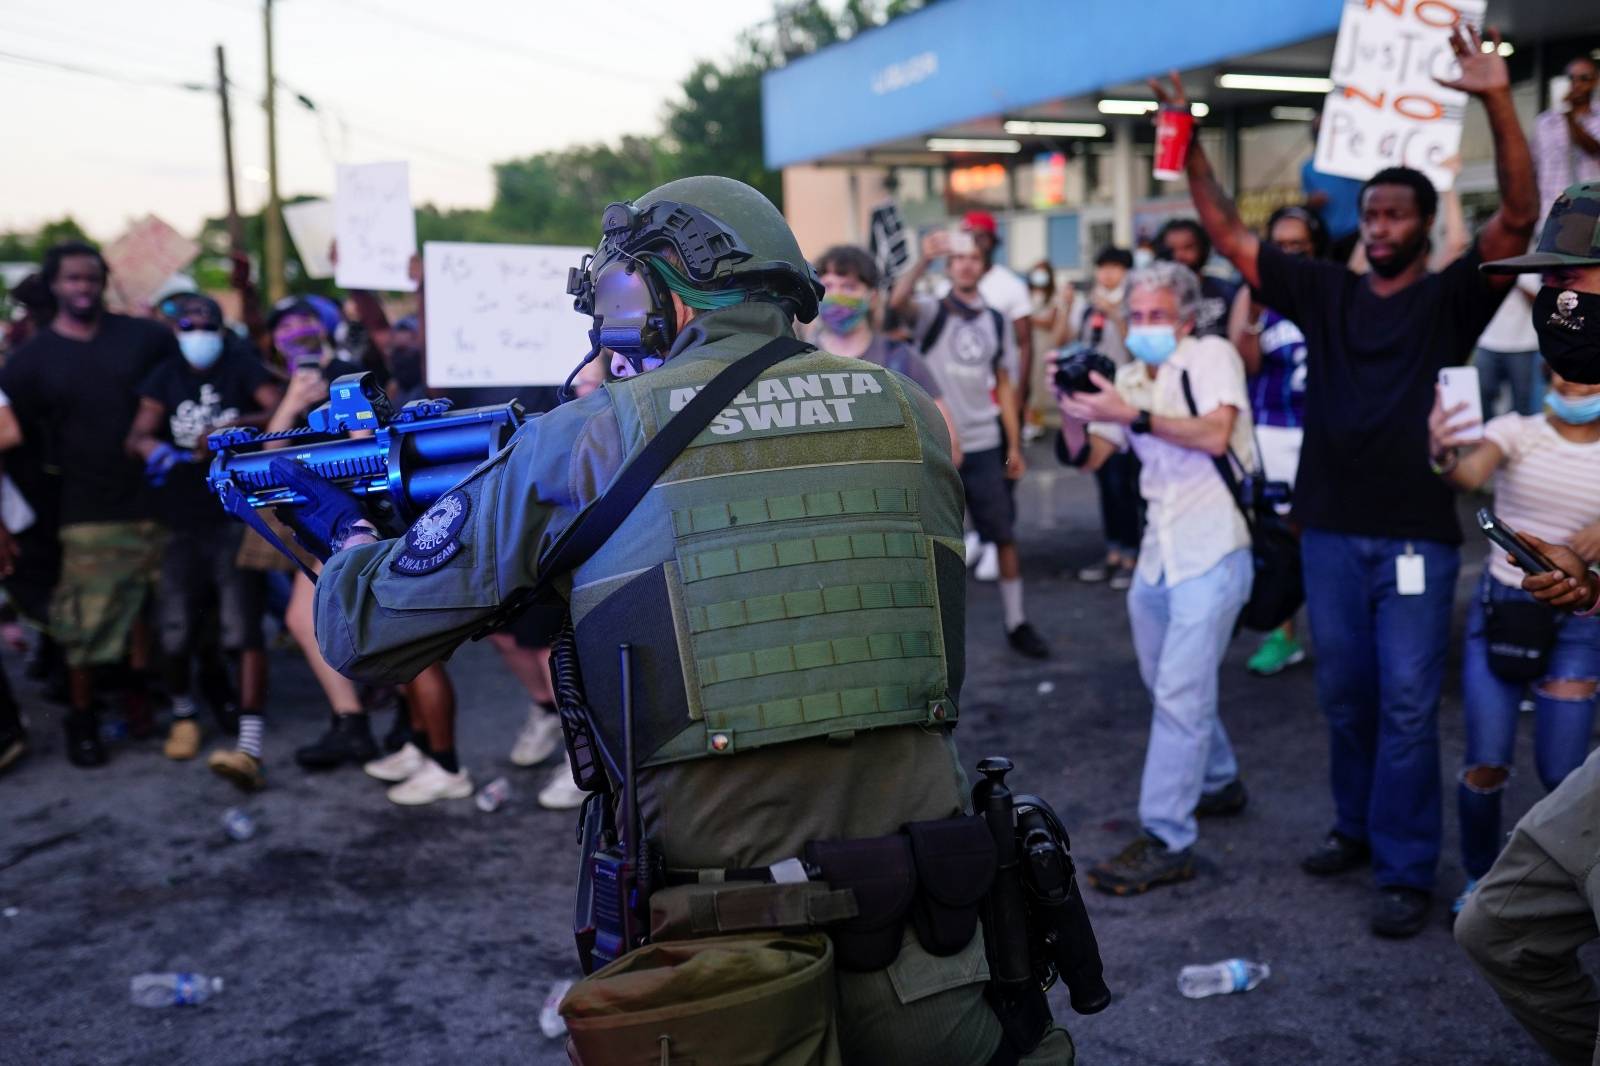 An Atlanta SWAT officer draws his weapon during a rally against racial inequality and the police shooting death of Rayshard Brooks, in Atlanta